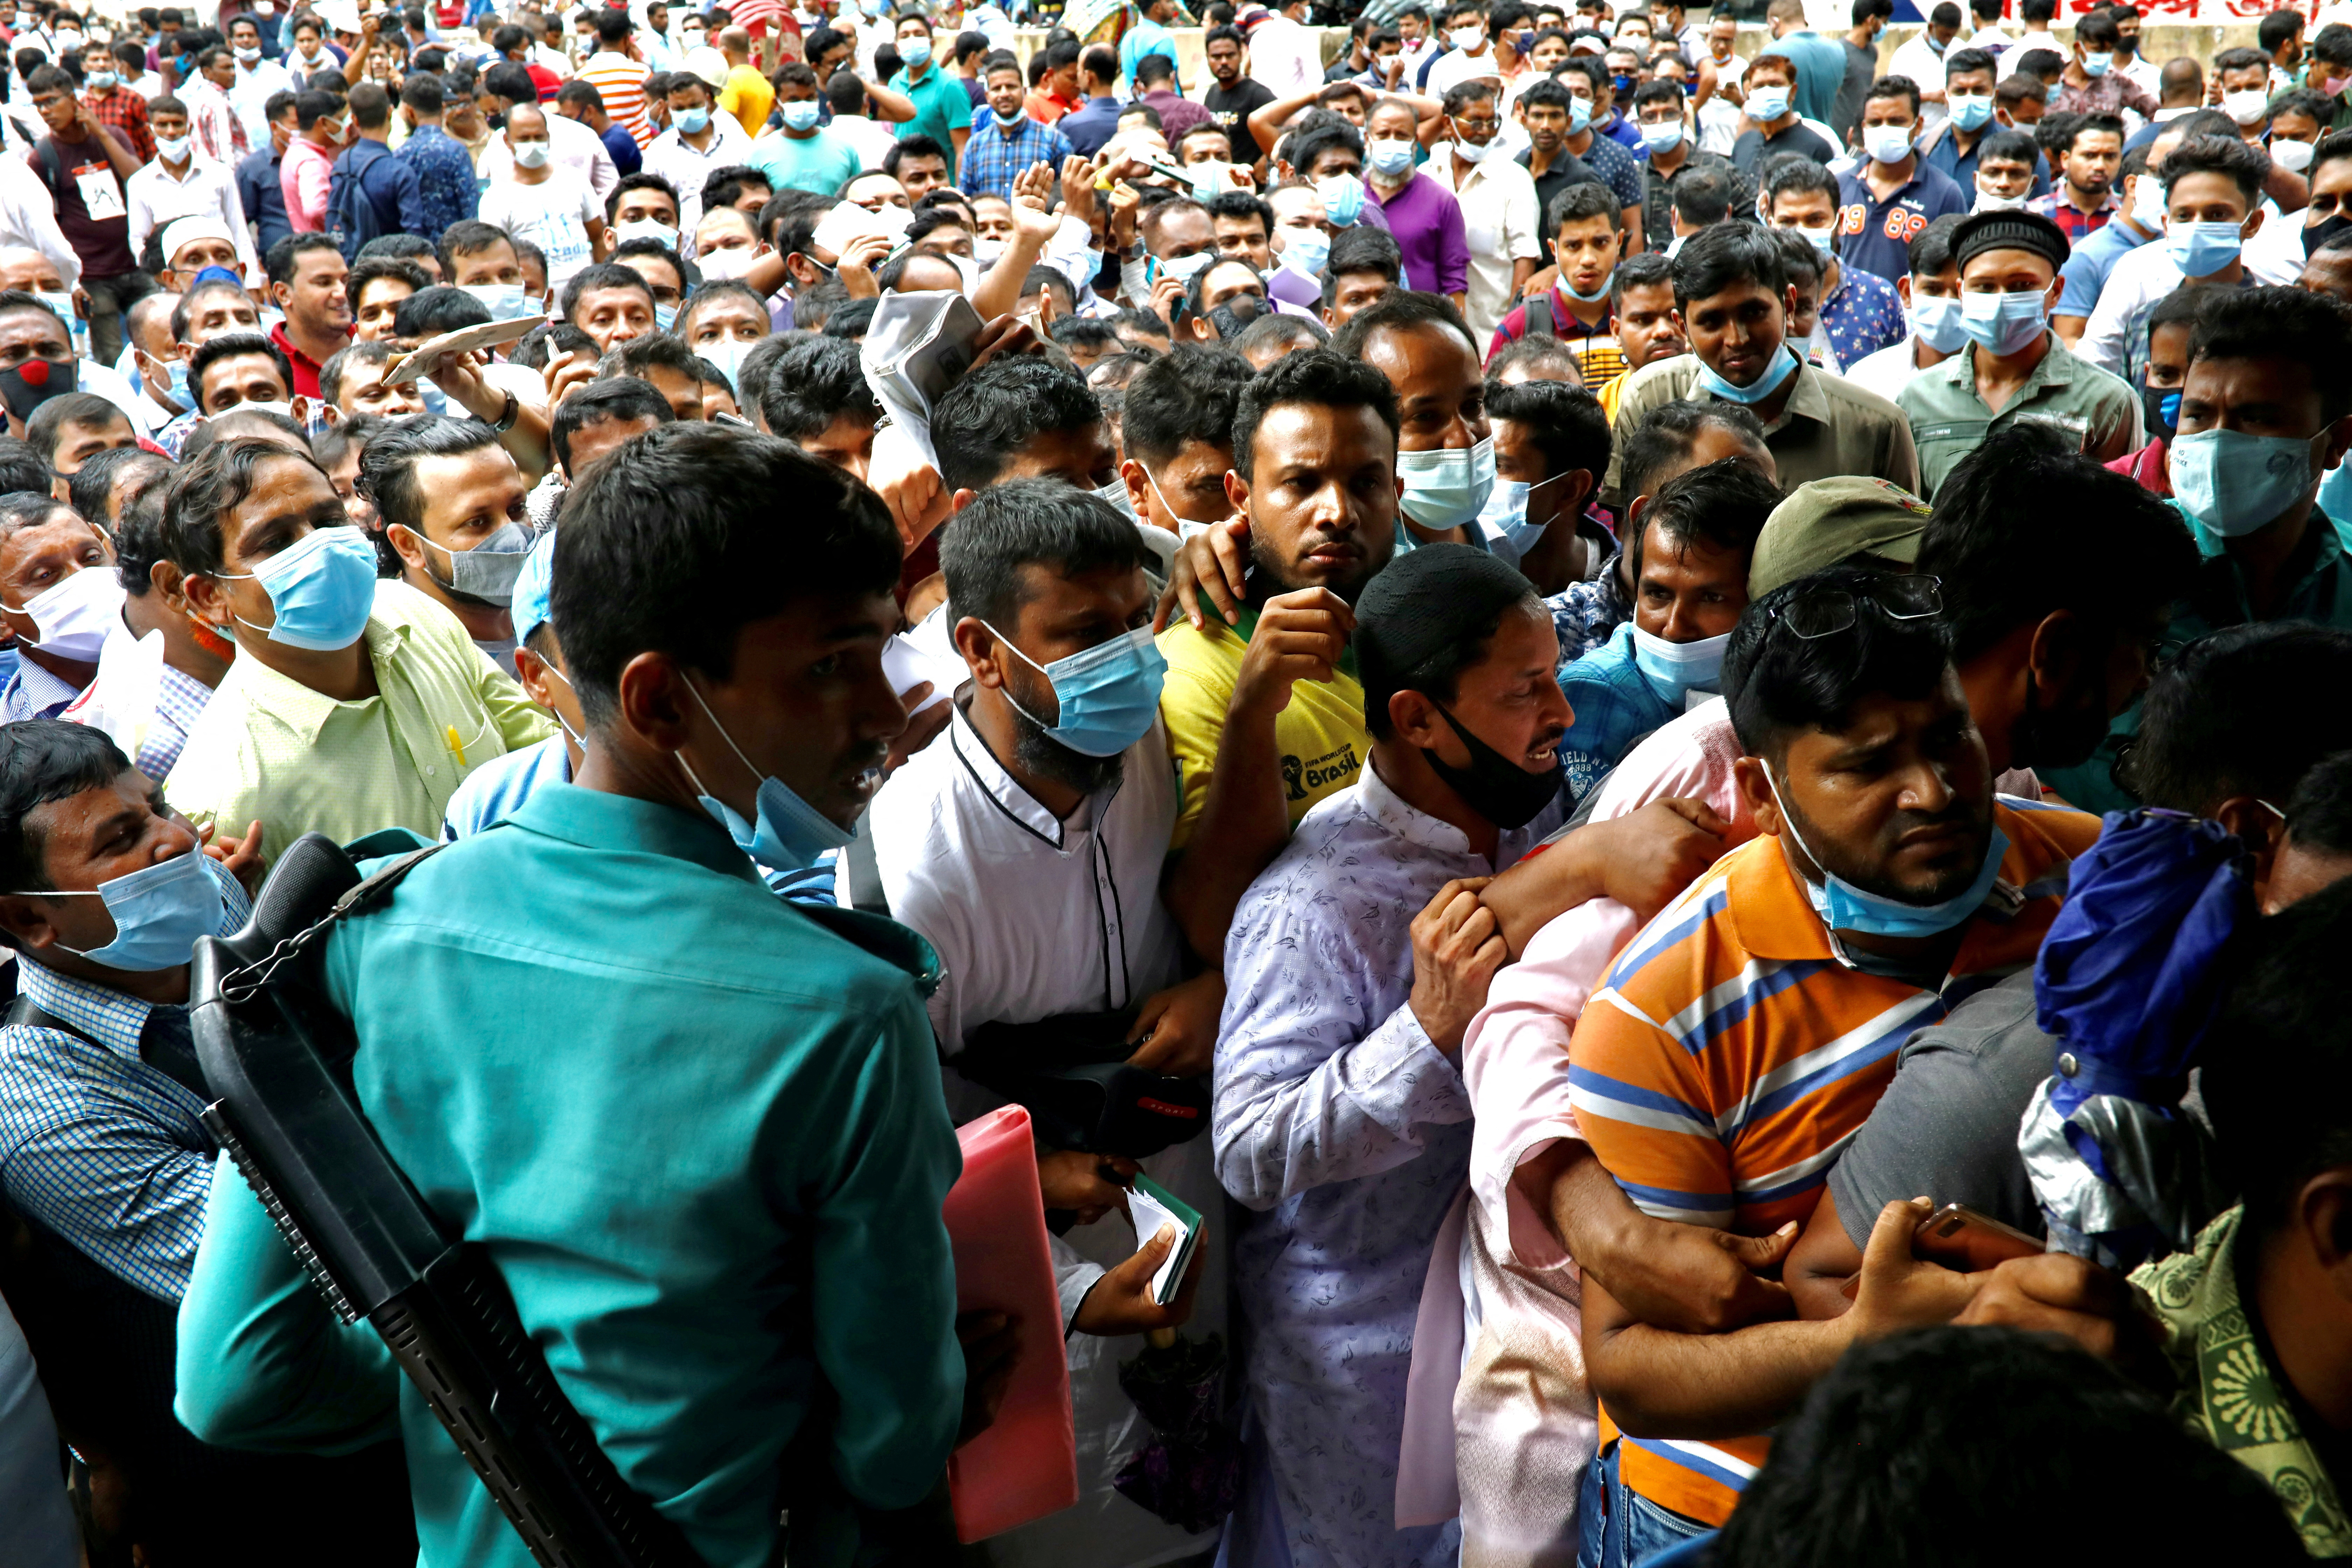 Police try to control the crowd as stranded Bangladeshi workers gather outside of the Biman Bangladesh Airlines office, demanding flight tickets to go back to Saudi Arabia, in Dhaka